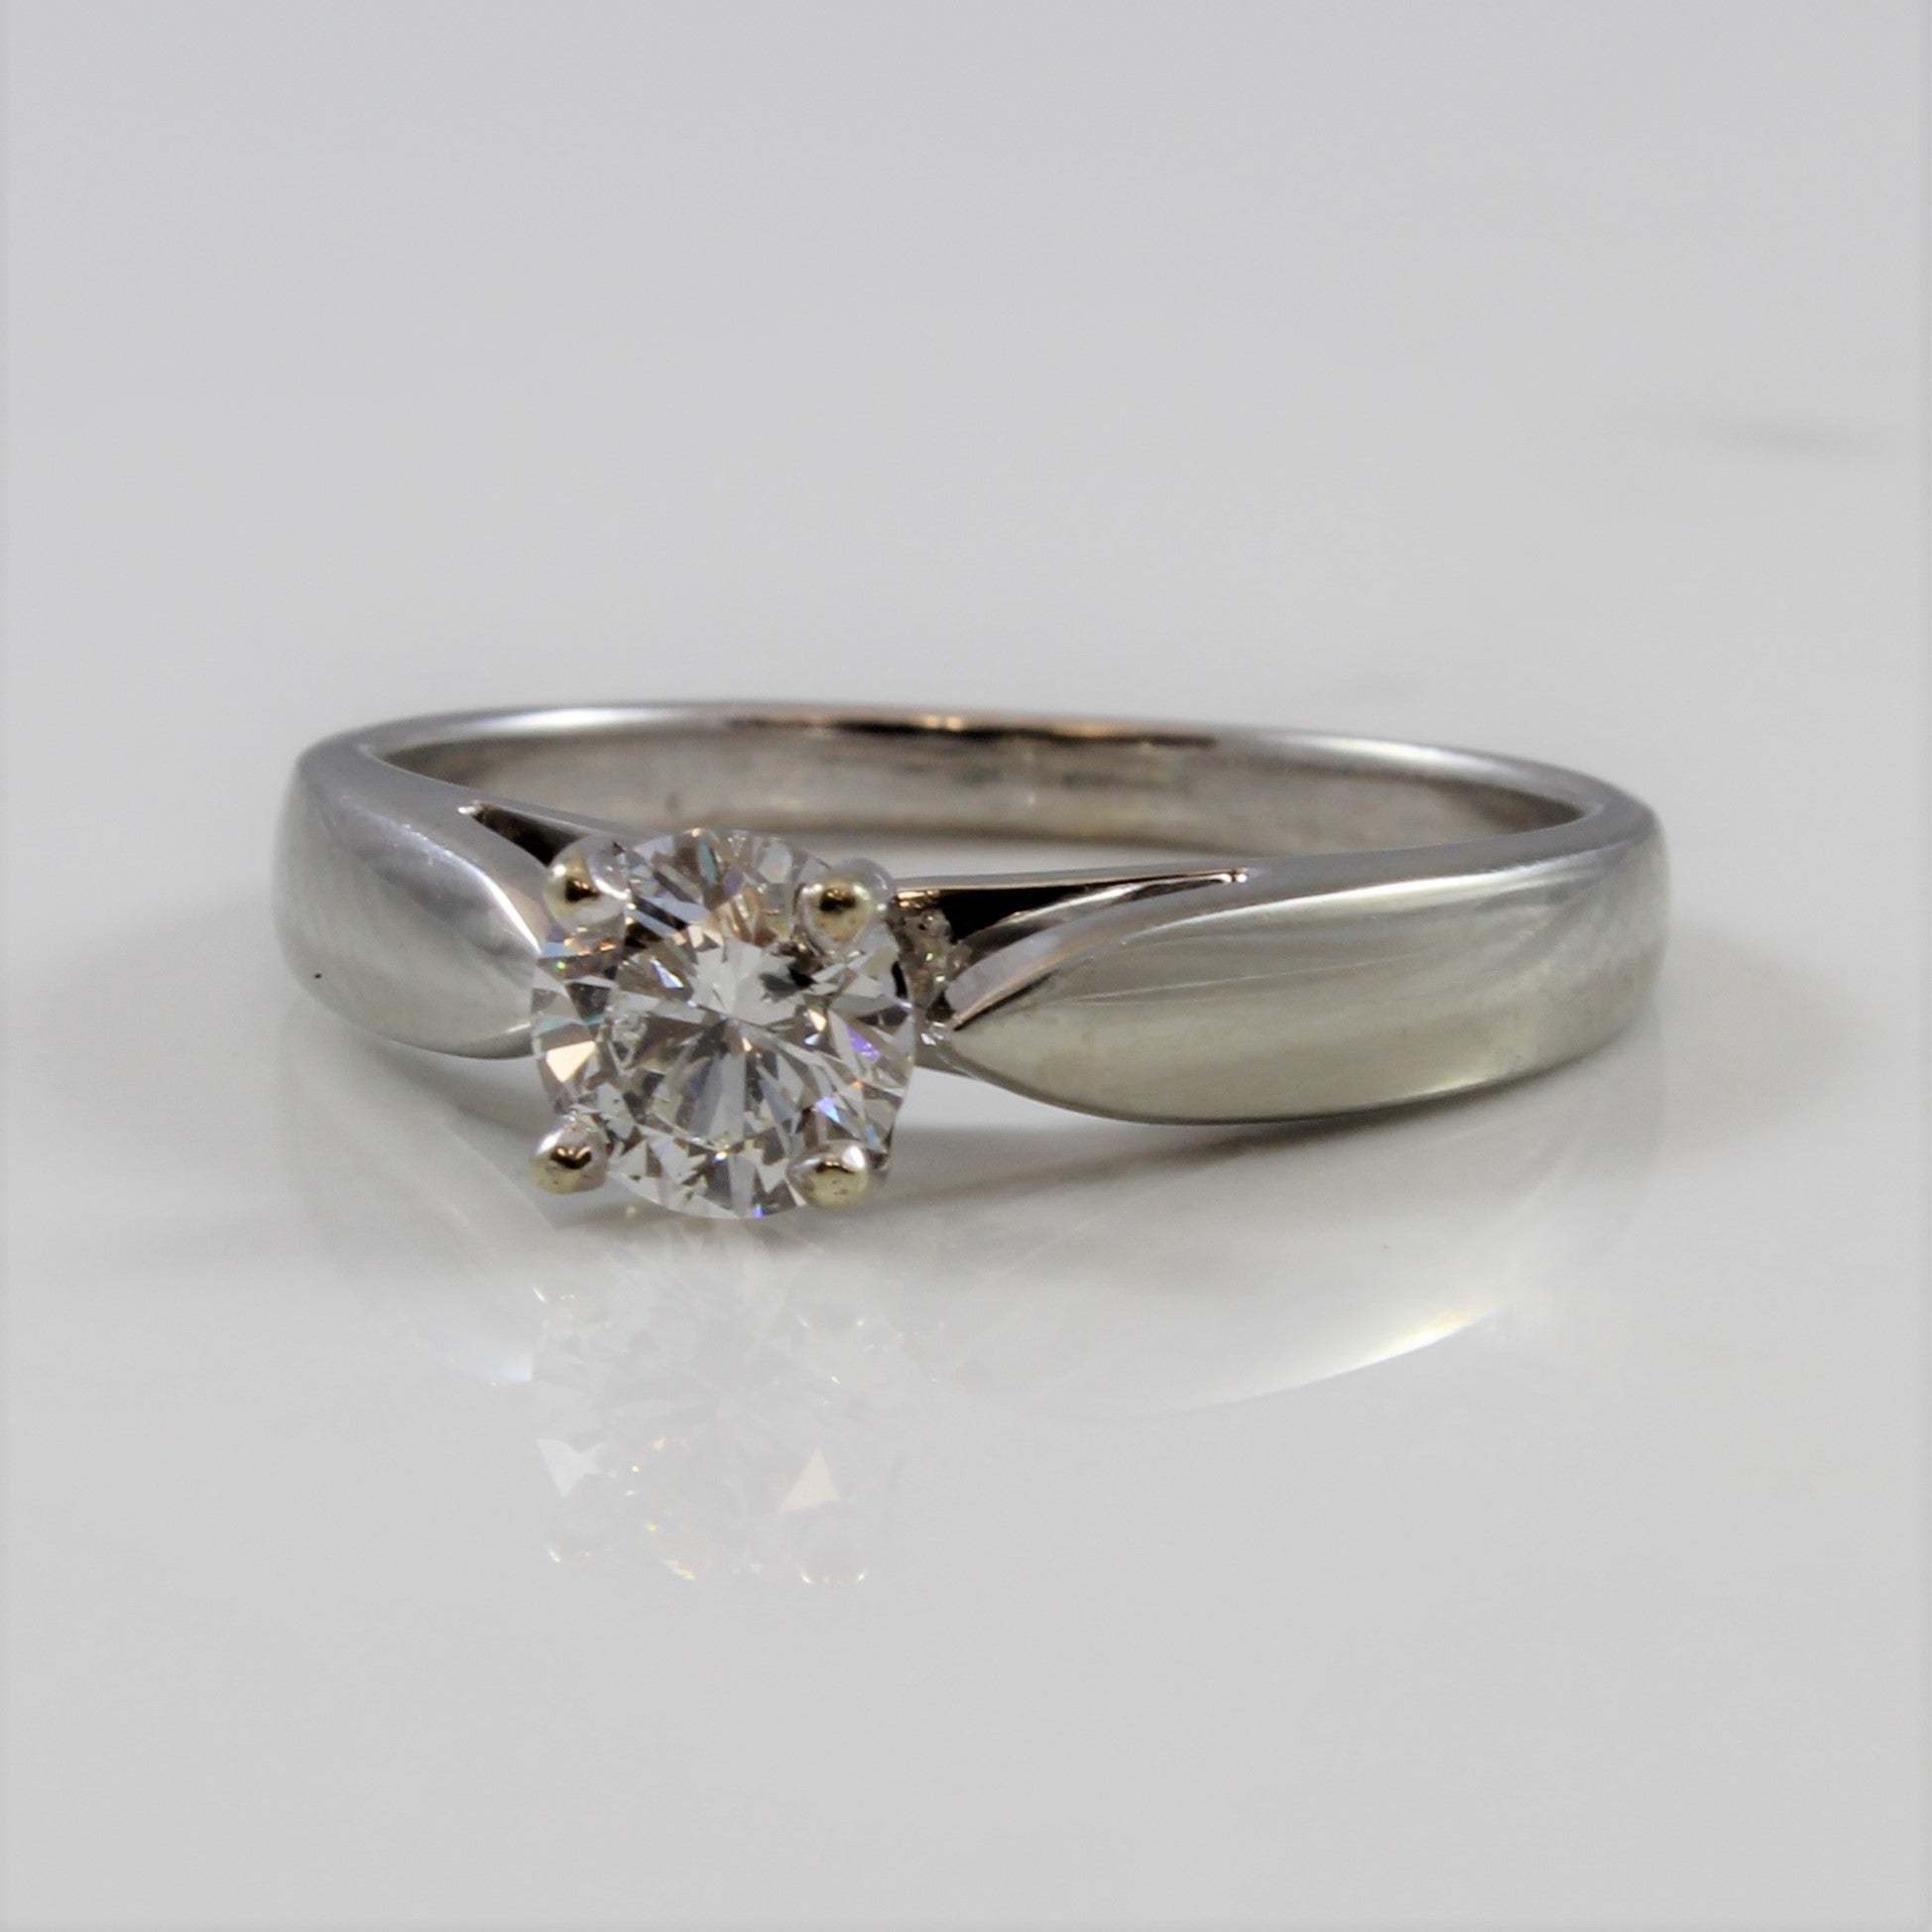 Tapered Solitaire Diamond Engagement Ring | 0.50 ct | SZ 6.25 |